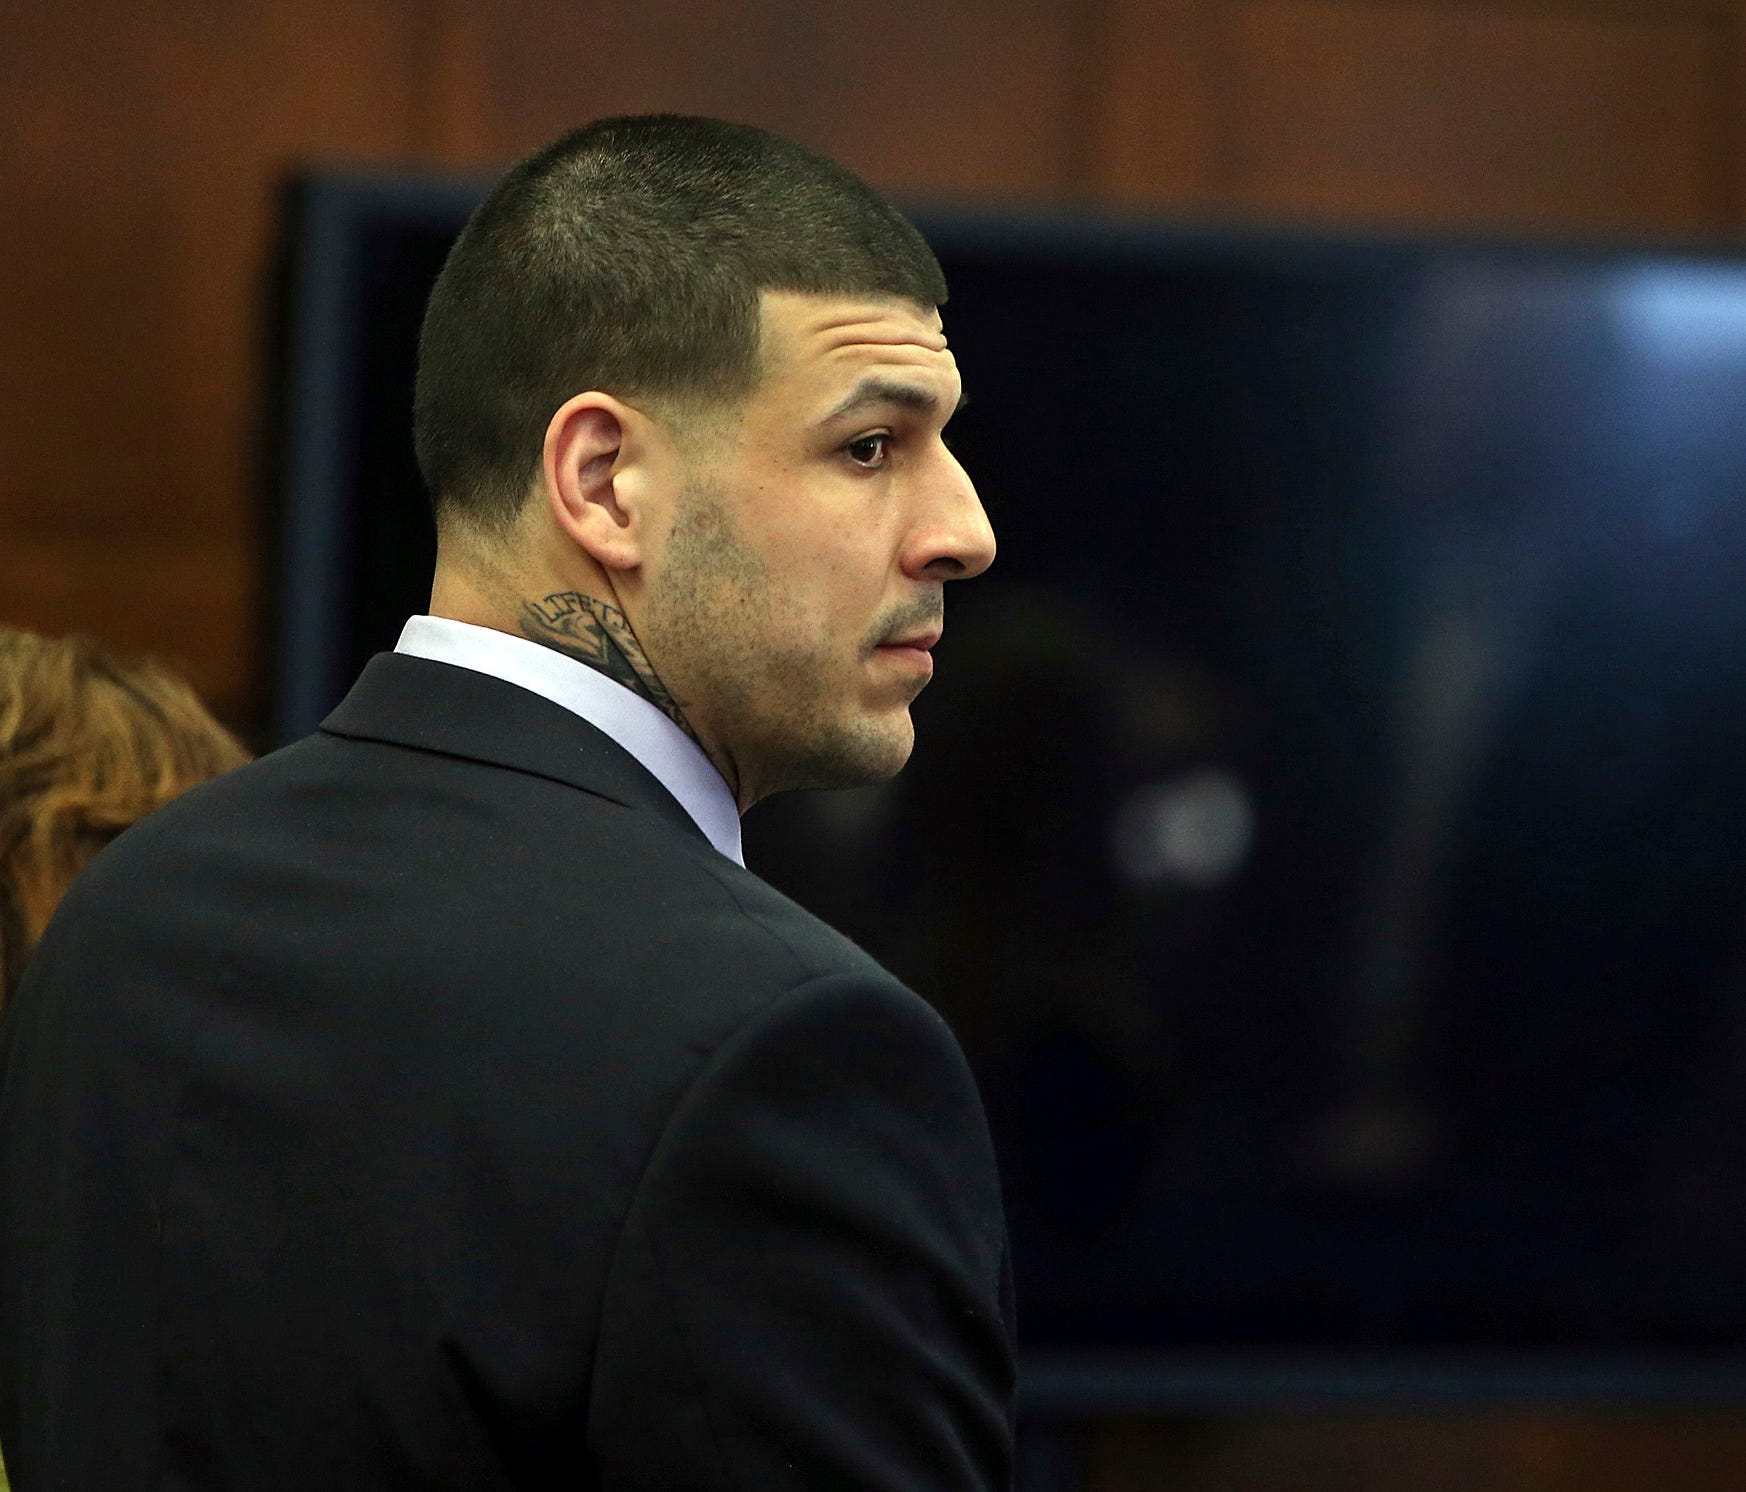 Former New England Patriots tight end Aaron Hernandez stands at the defense table when court is adjourned without a verdict on day five of jury deliberations in his double murder trial at Suffolk Superior Court on Thursday, April 13, 2017.